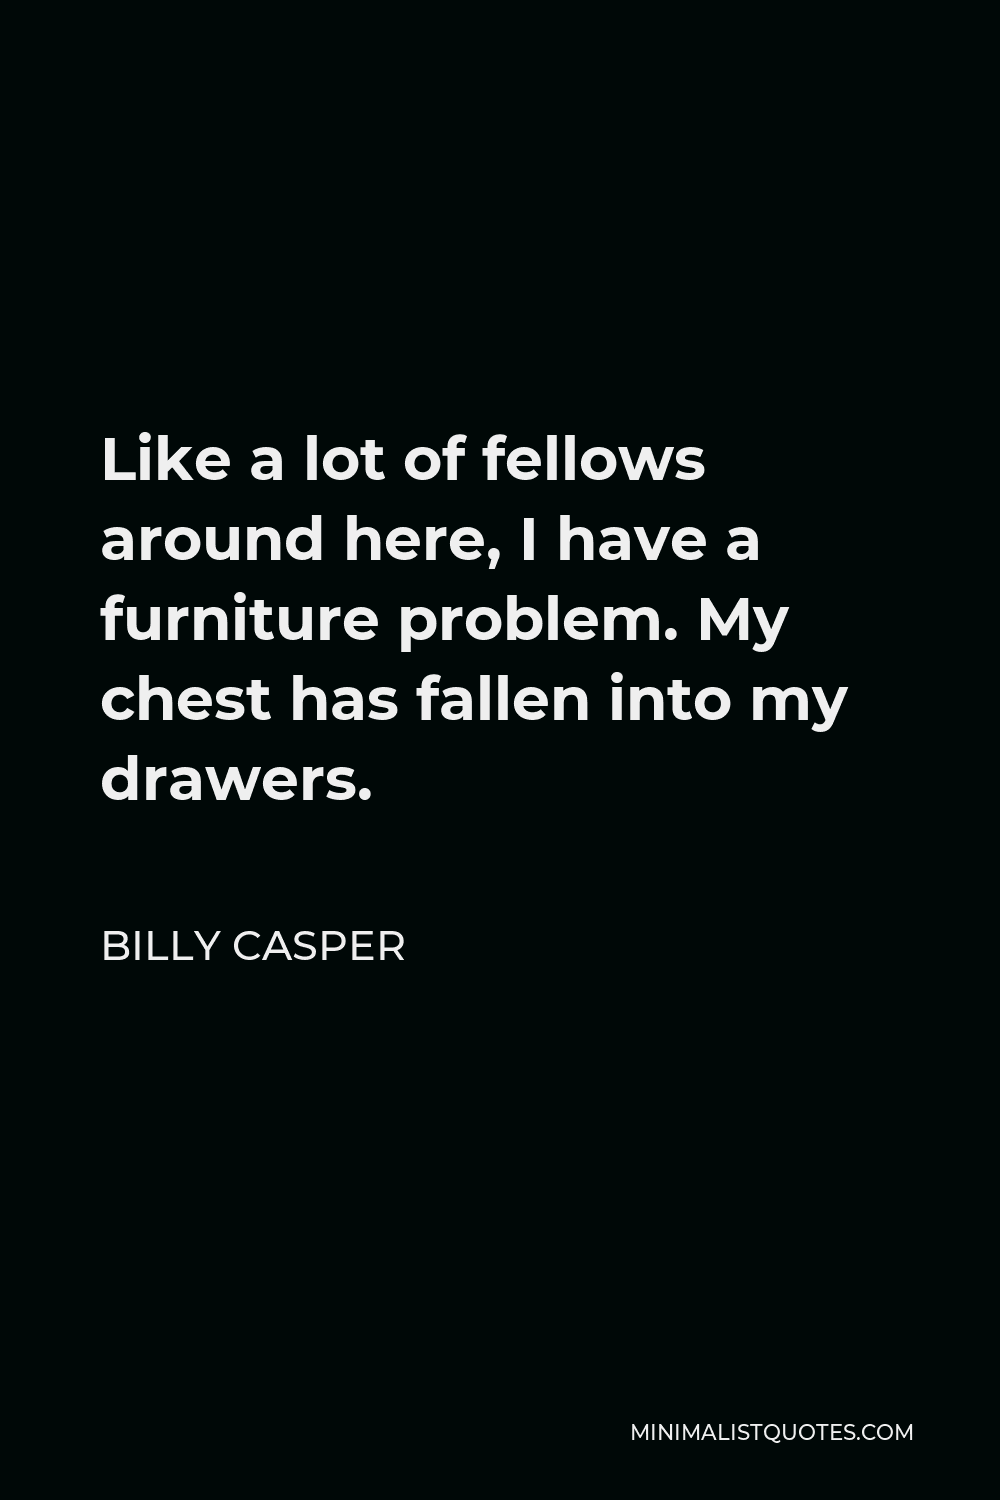 Billy Casper Quote - Like a lot of fellows around here, I have a furniture problem. My chest has fallen into my drawers.